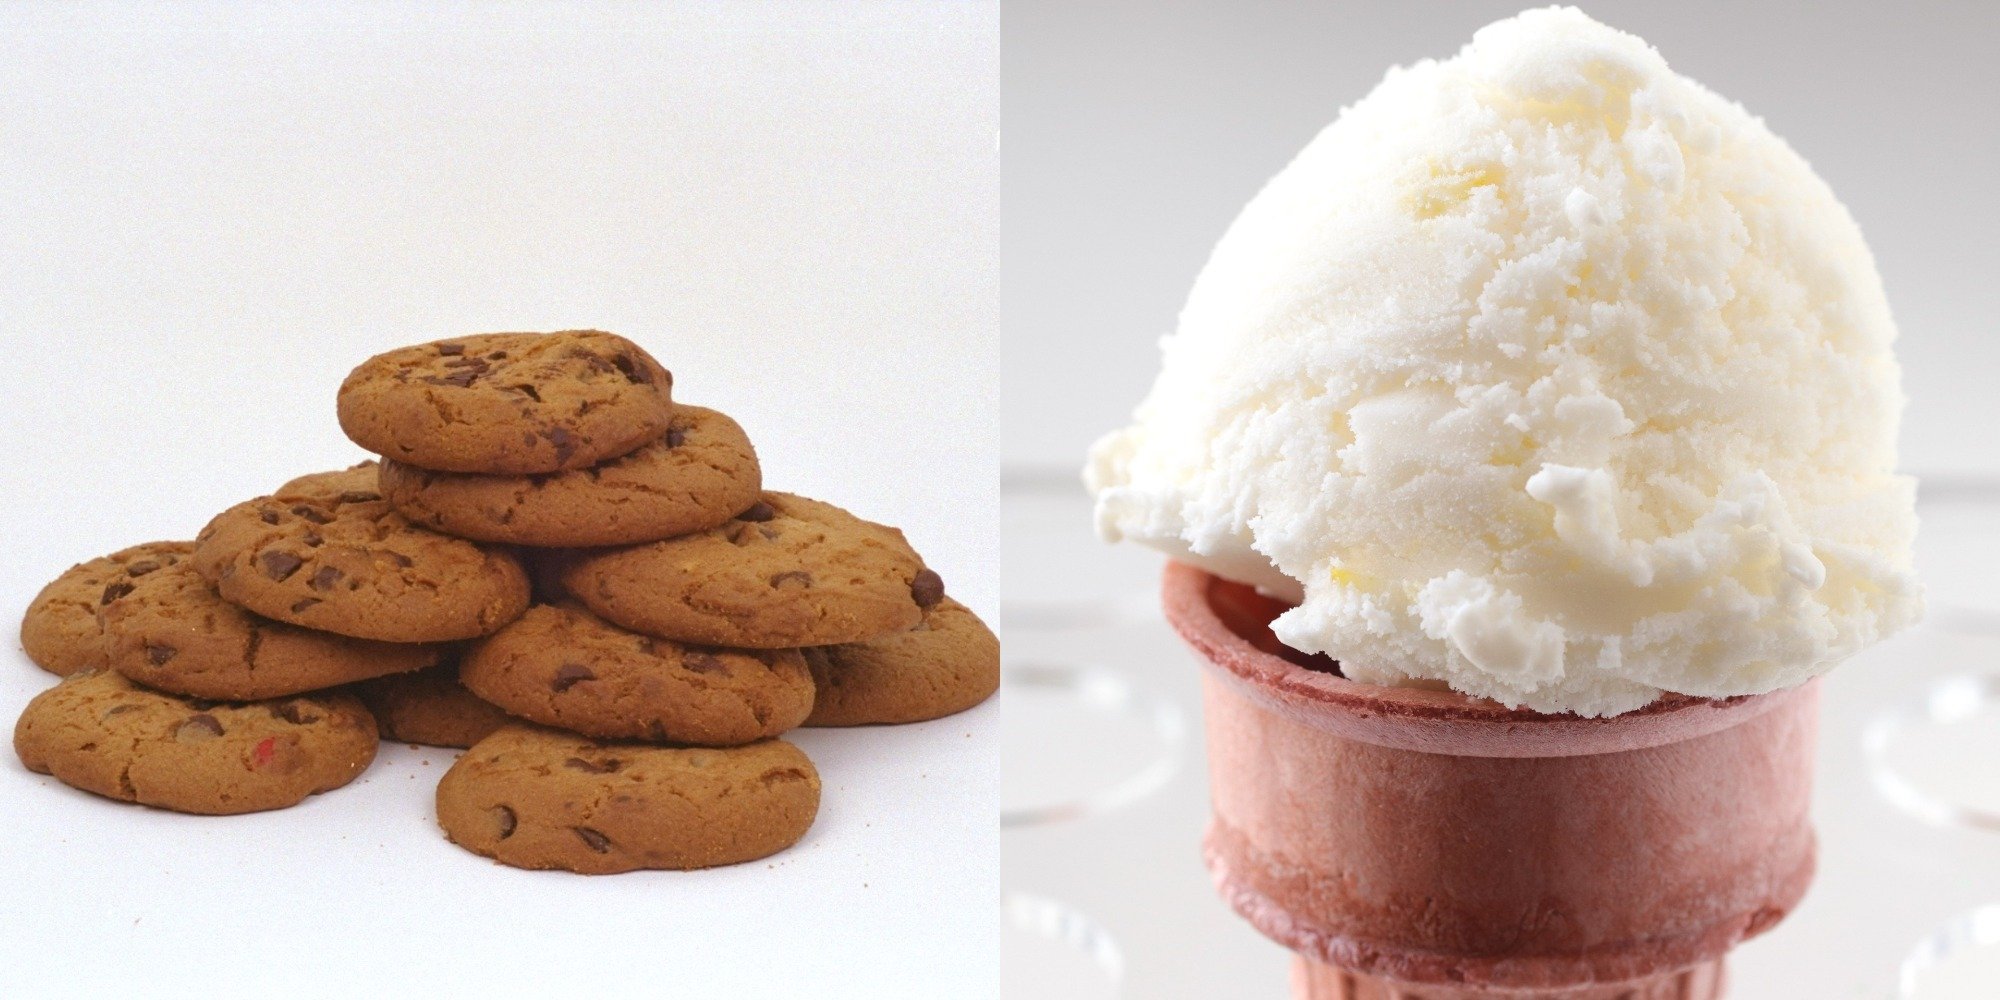 Chocolate chip cookies and ice cream photo montage.